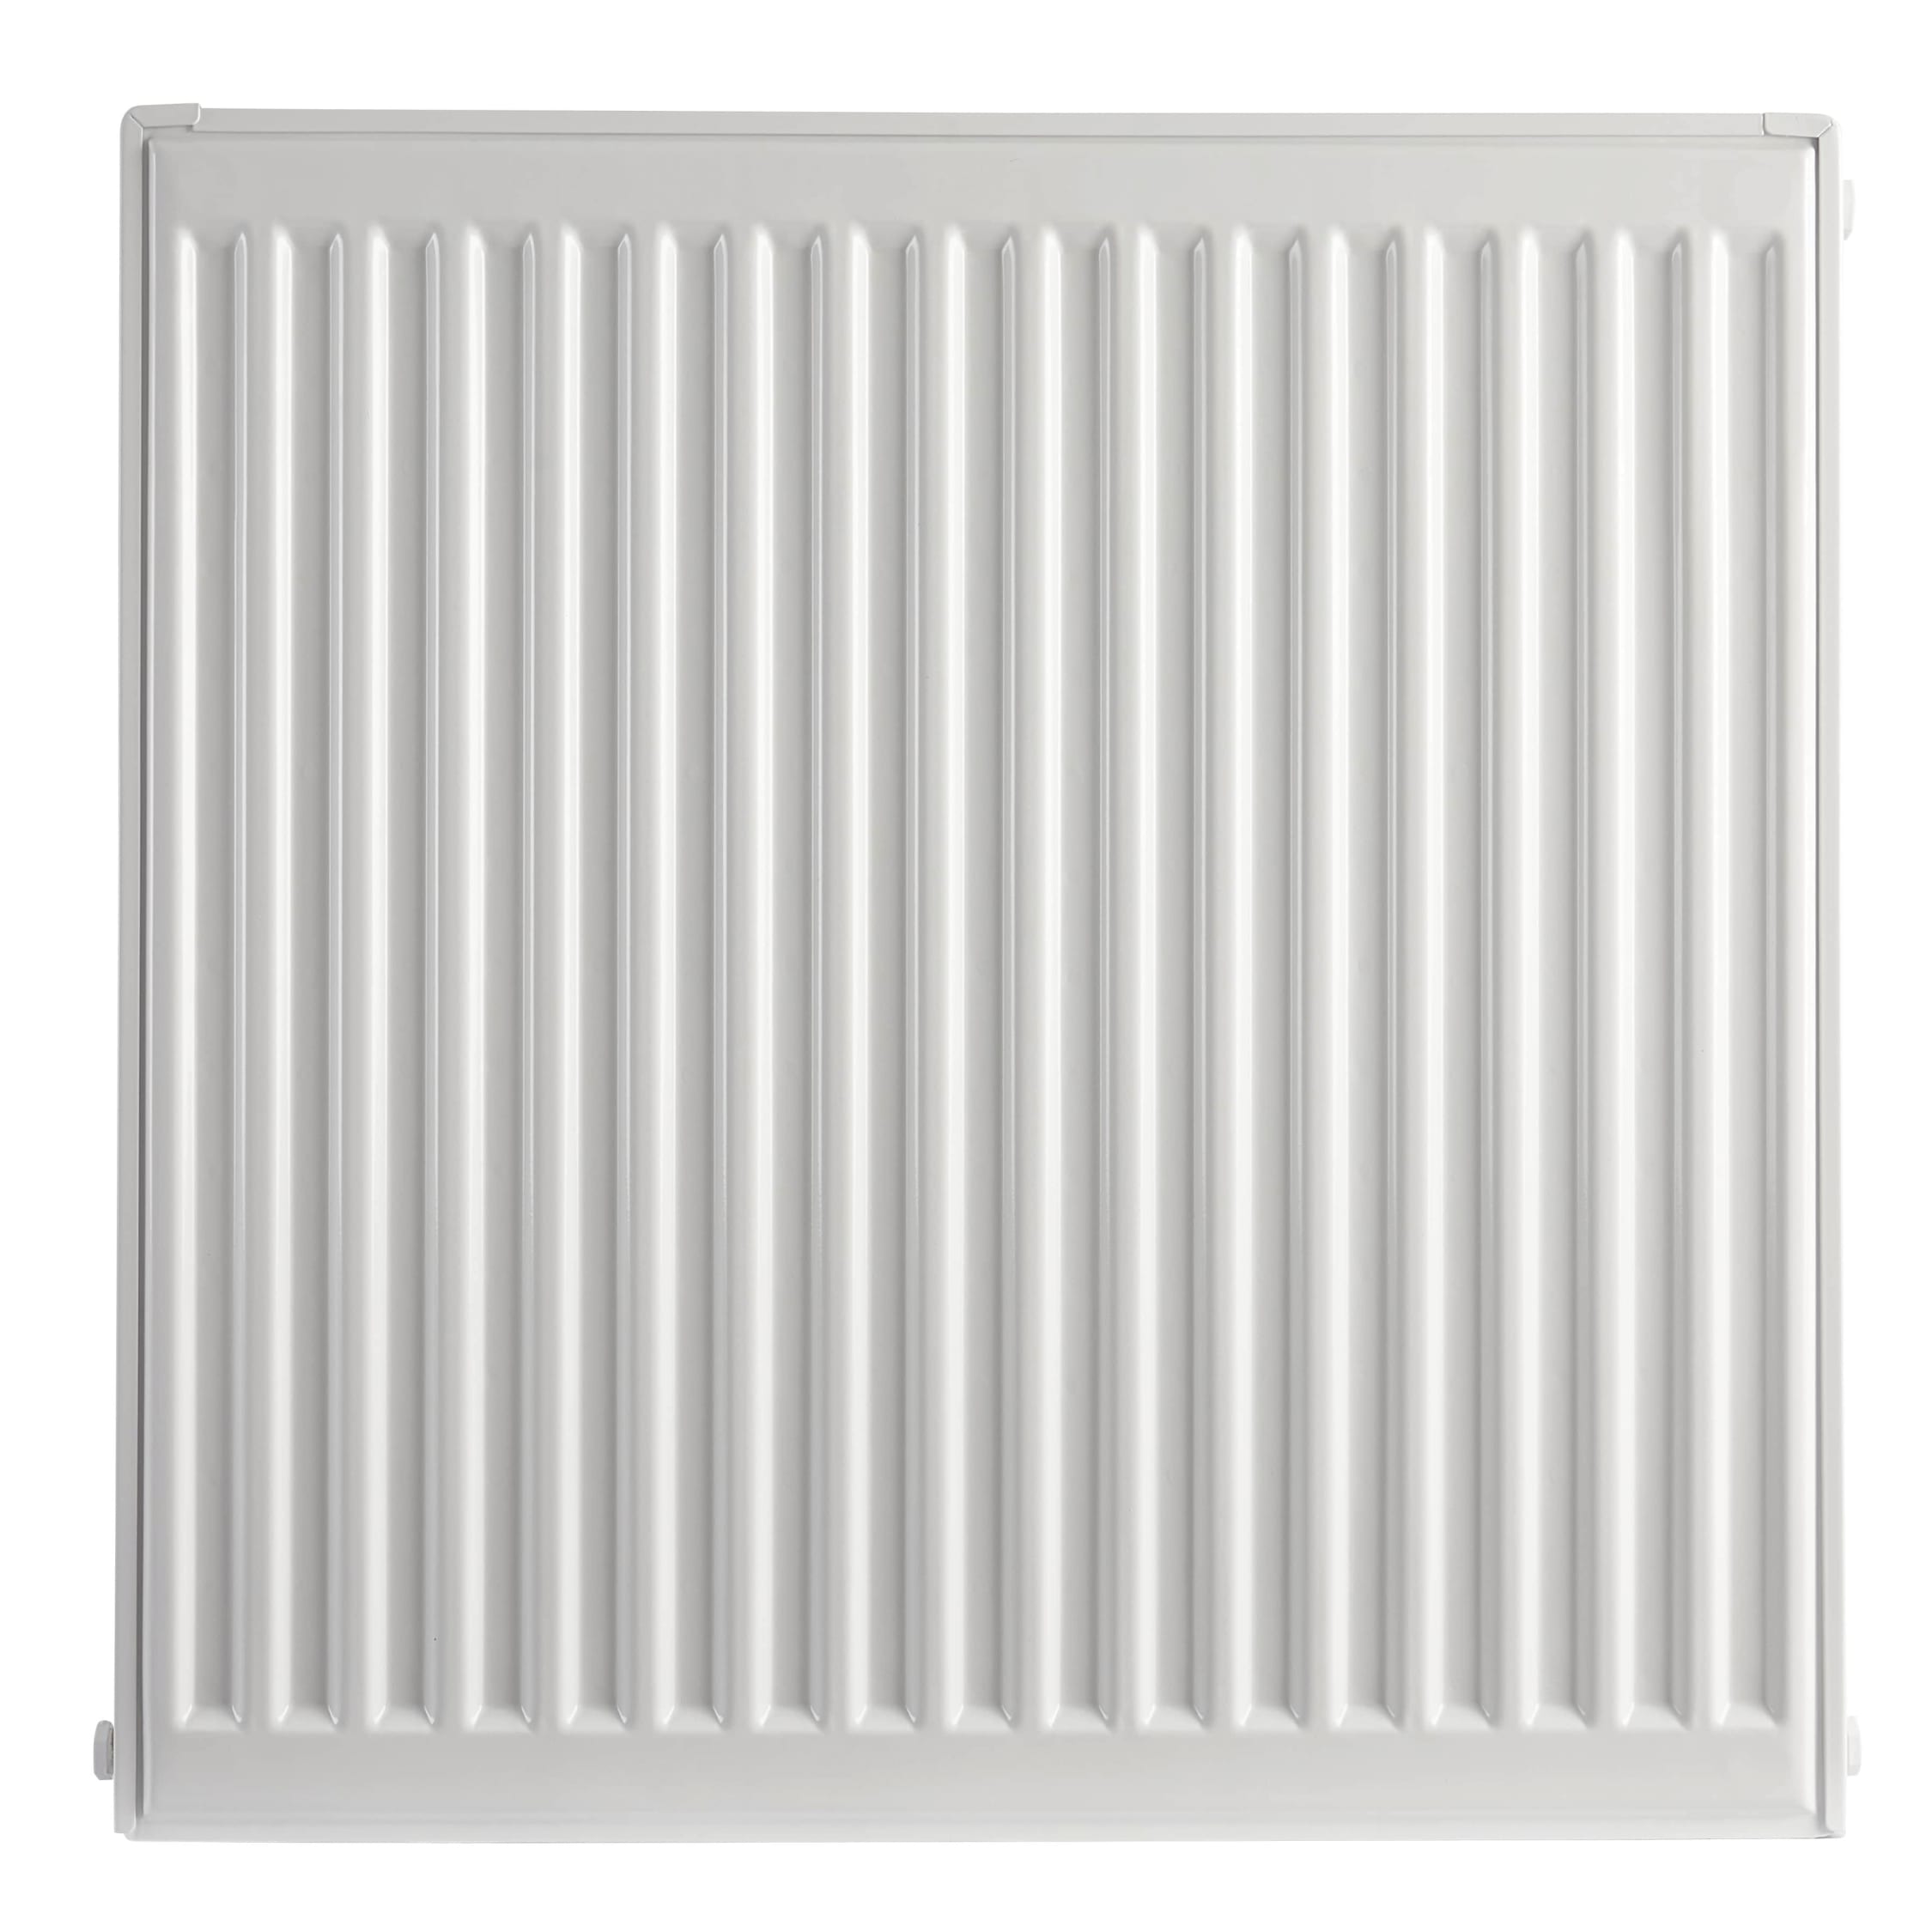 PLEASE COMPARE OUR RATINGS BRAND NEW RADIATOR #1 QUALITY & SERVICE 